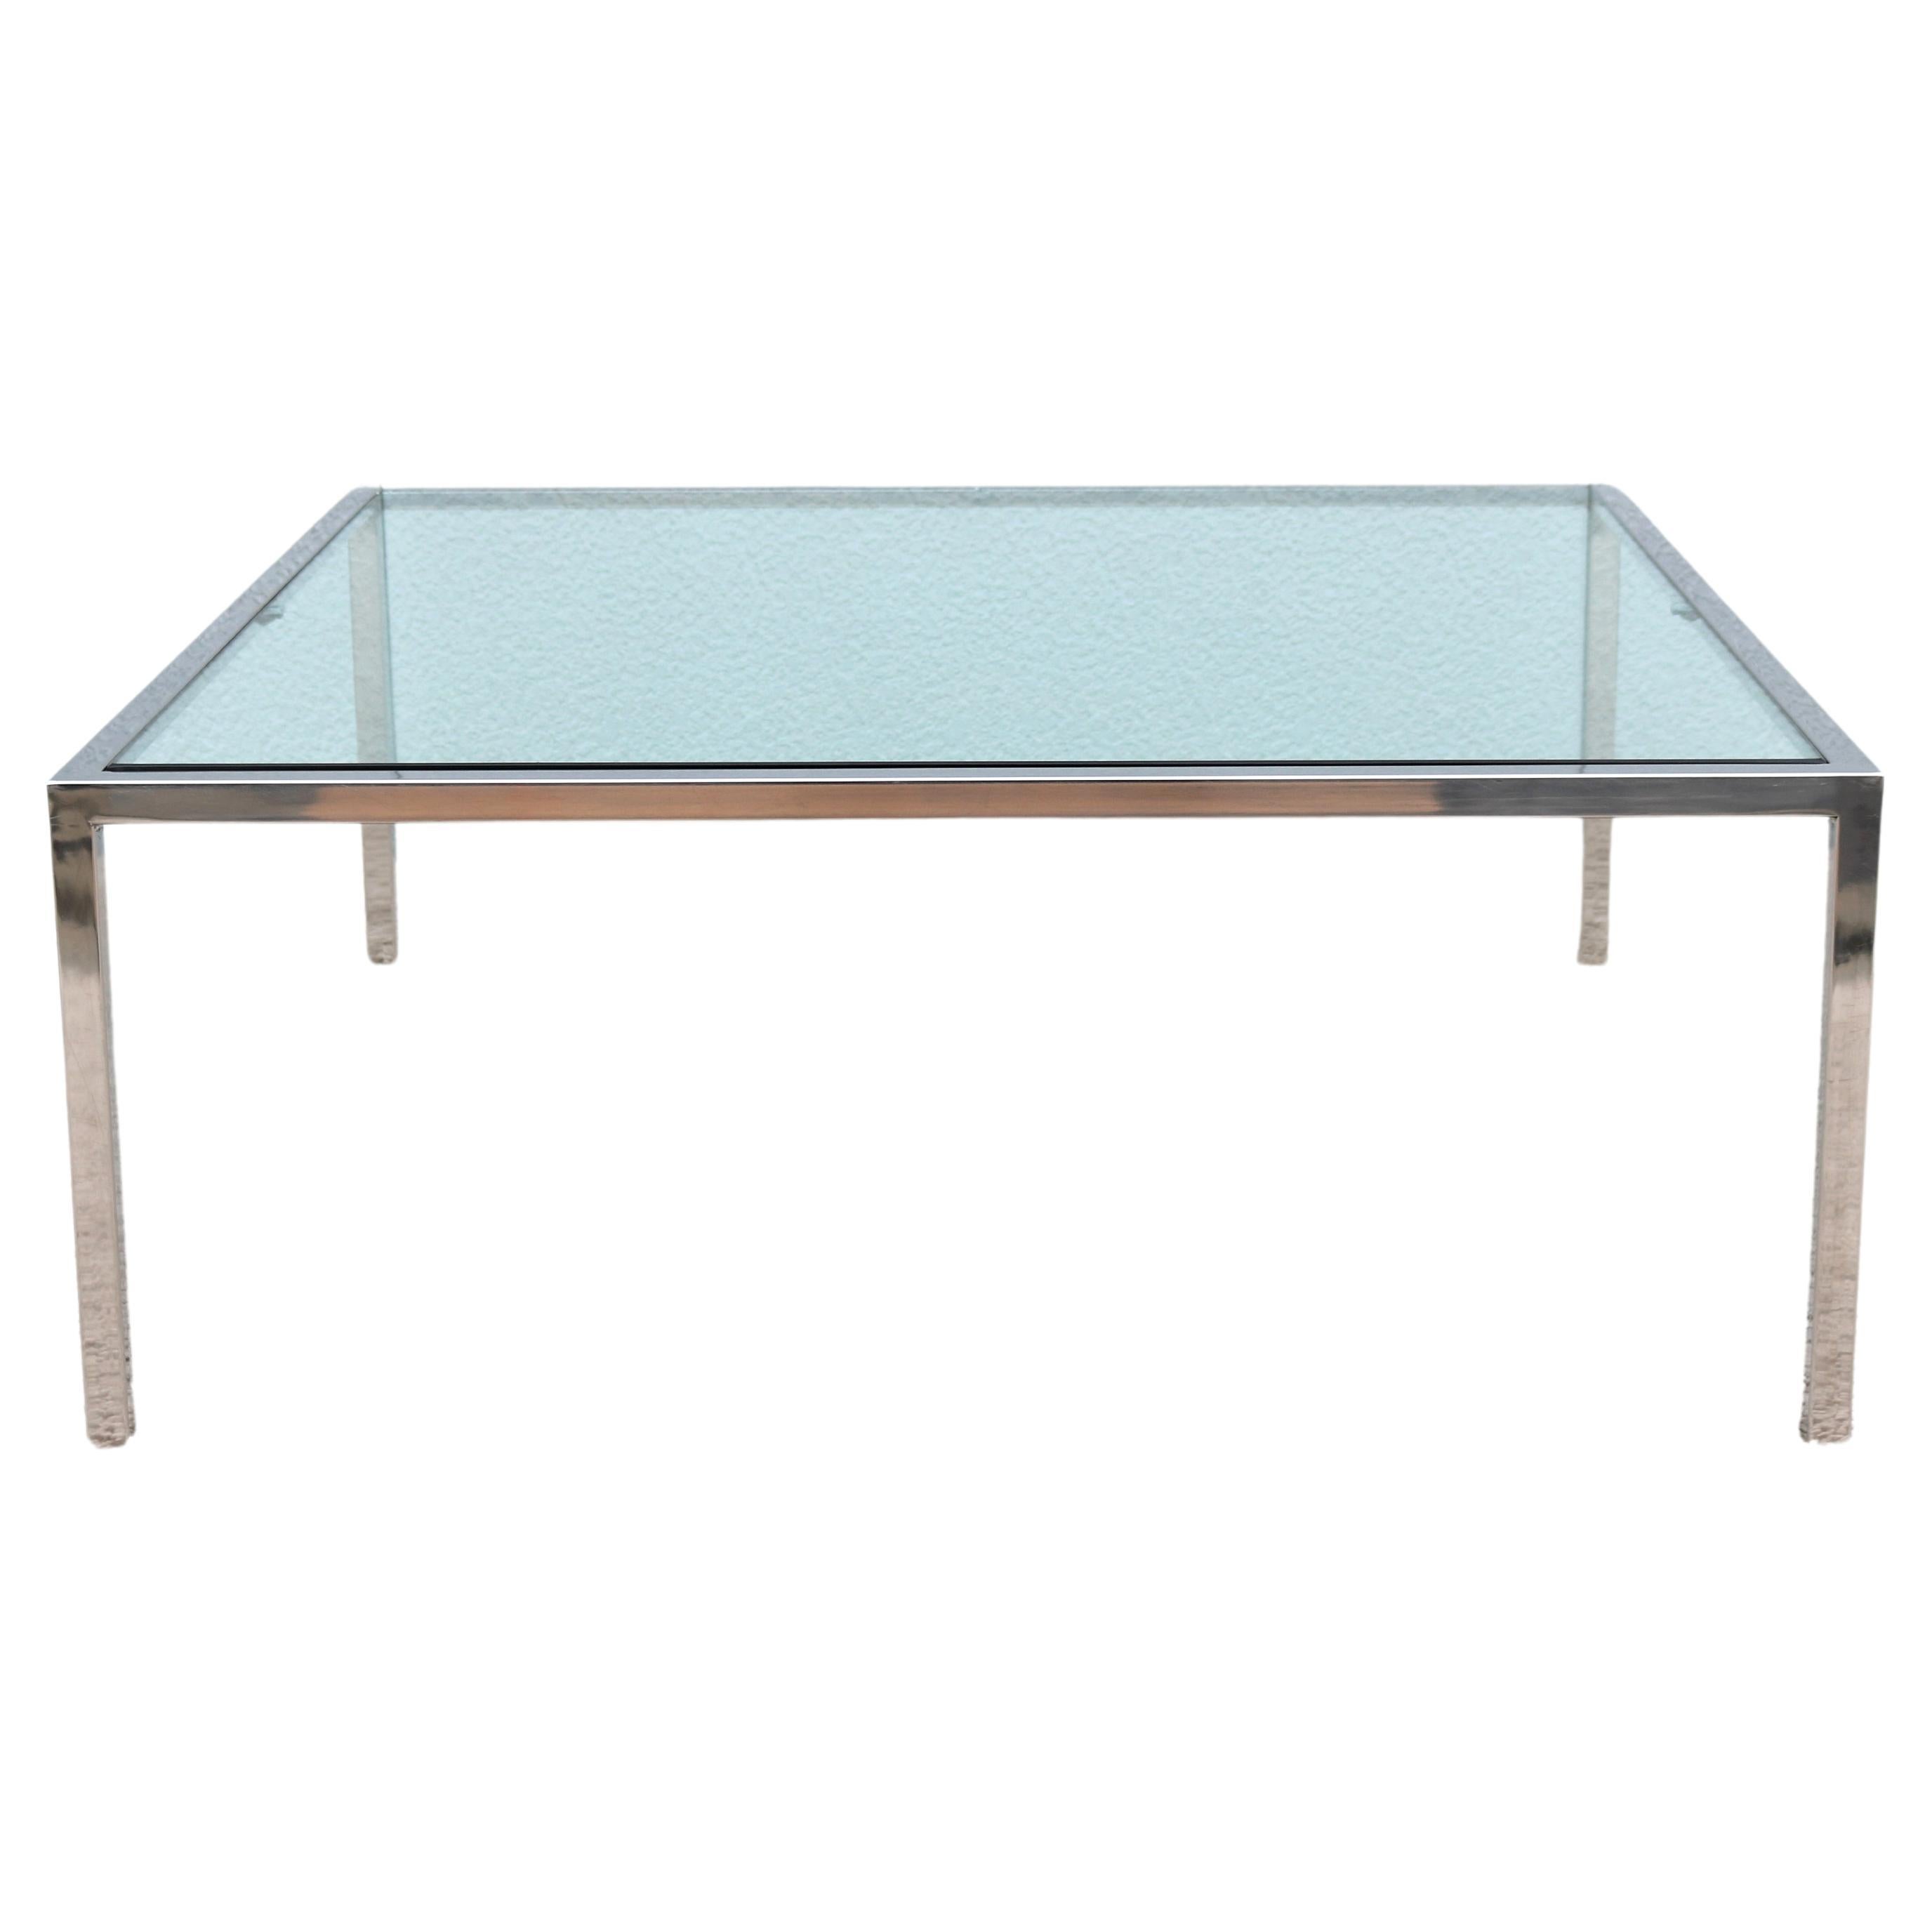 Mid-Century Modern Milo Baughman Style Glass Stainless Steel Square Coffee Table For Sale